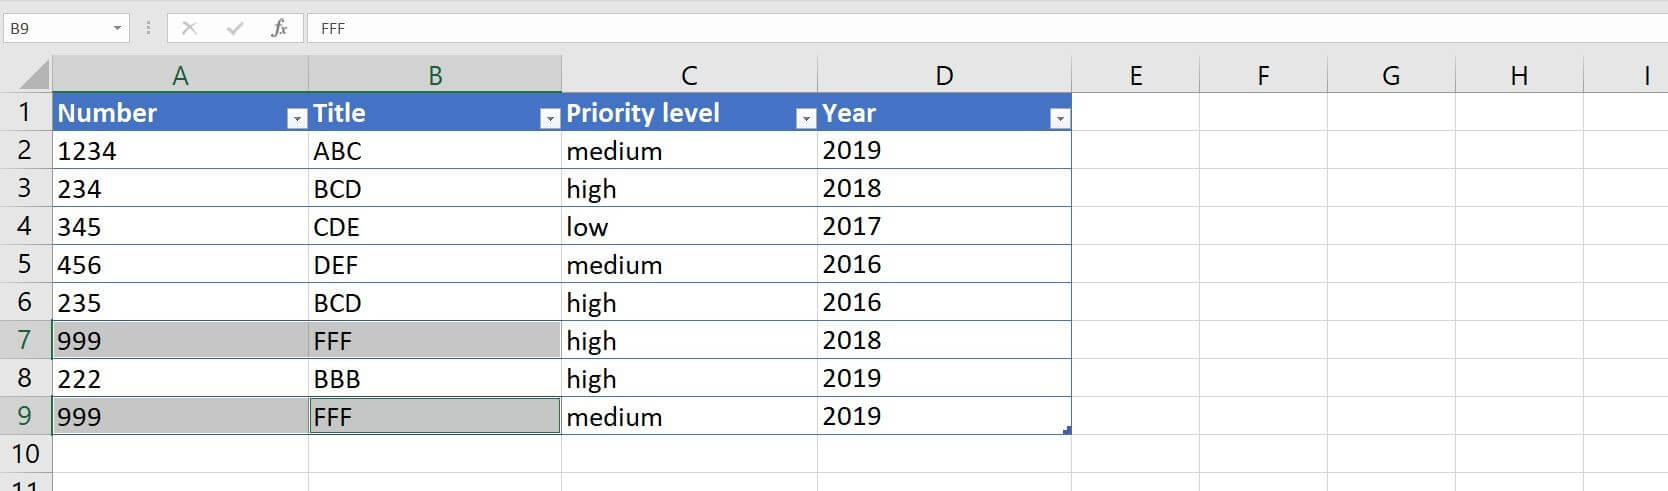 Excel 2016: sample entry with duplicates